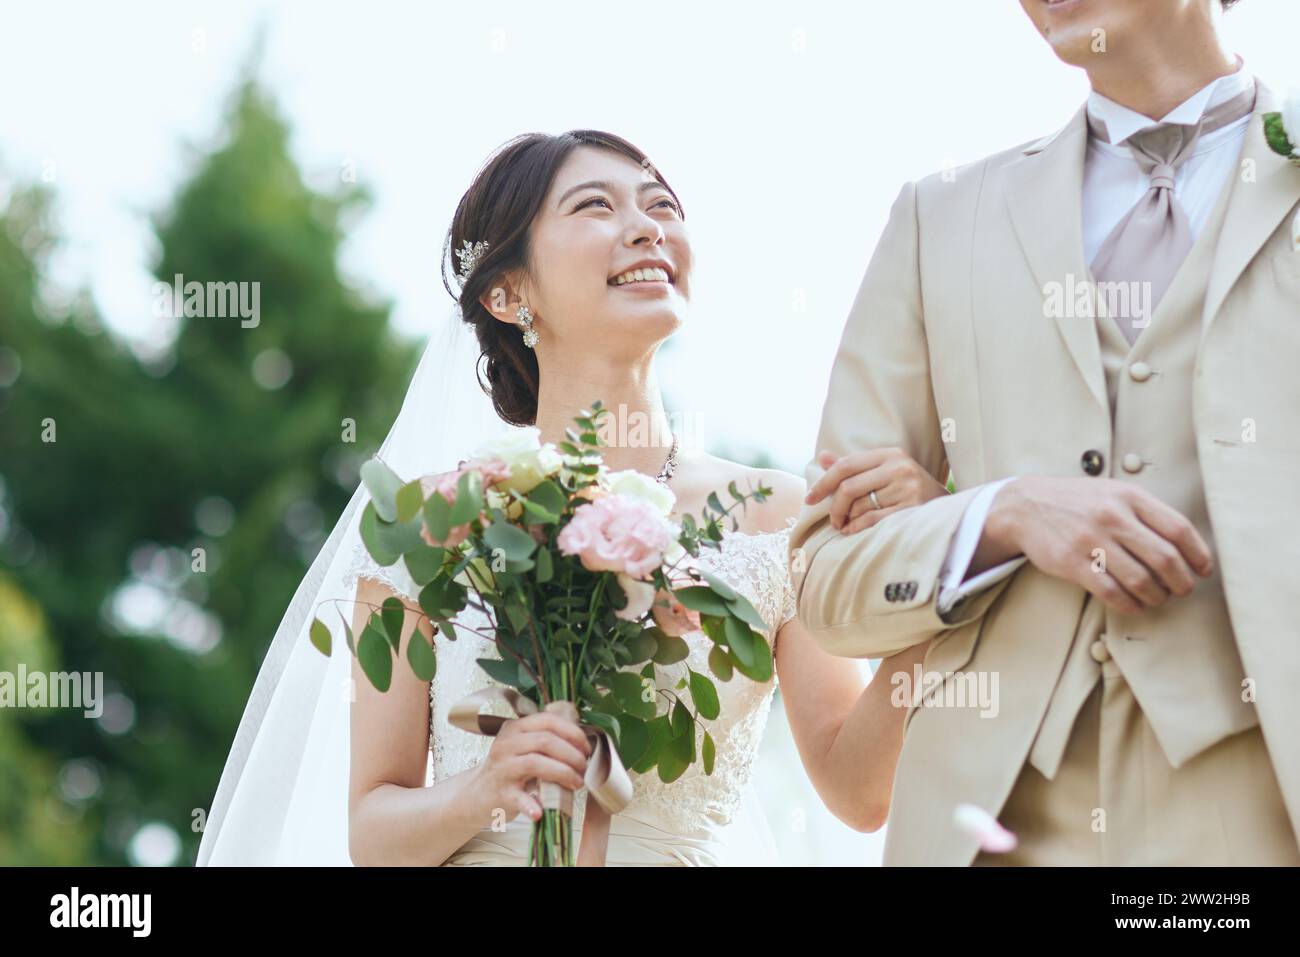 A bride and groom smile as they stand together Stock Photo